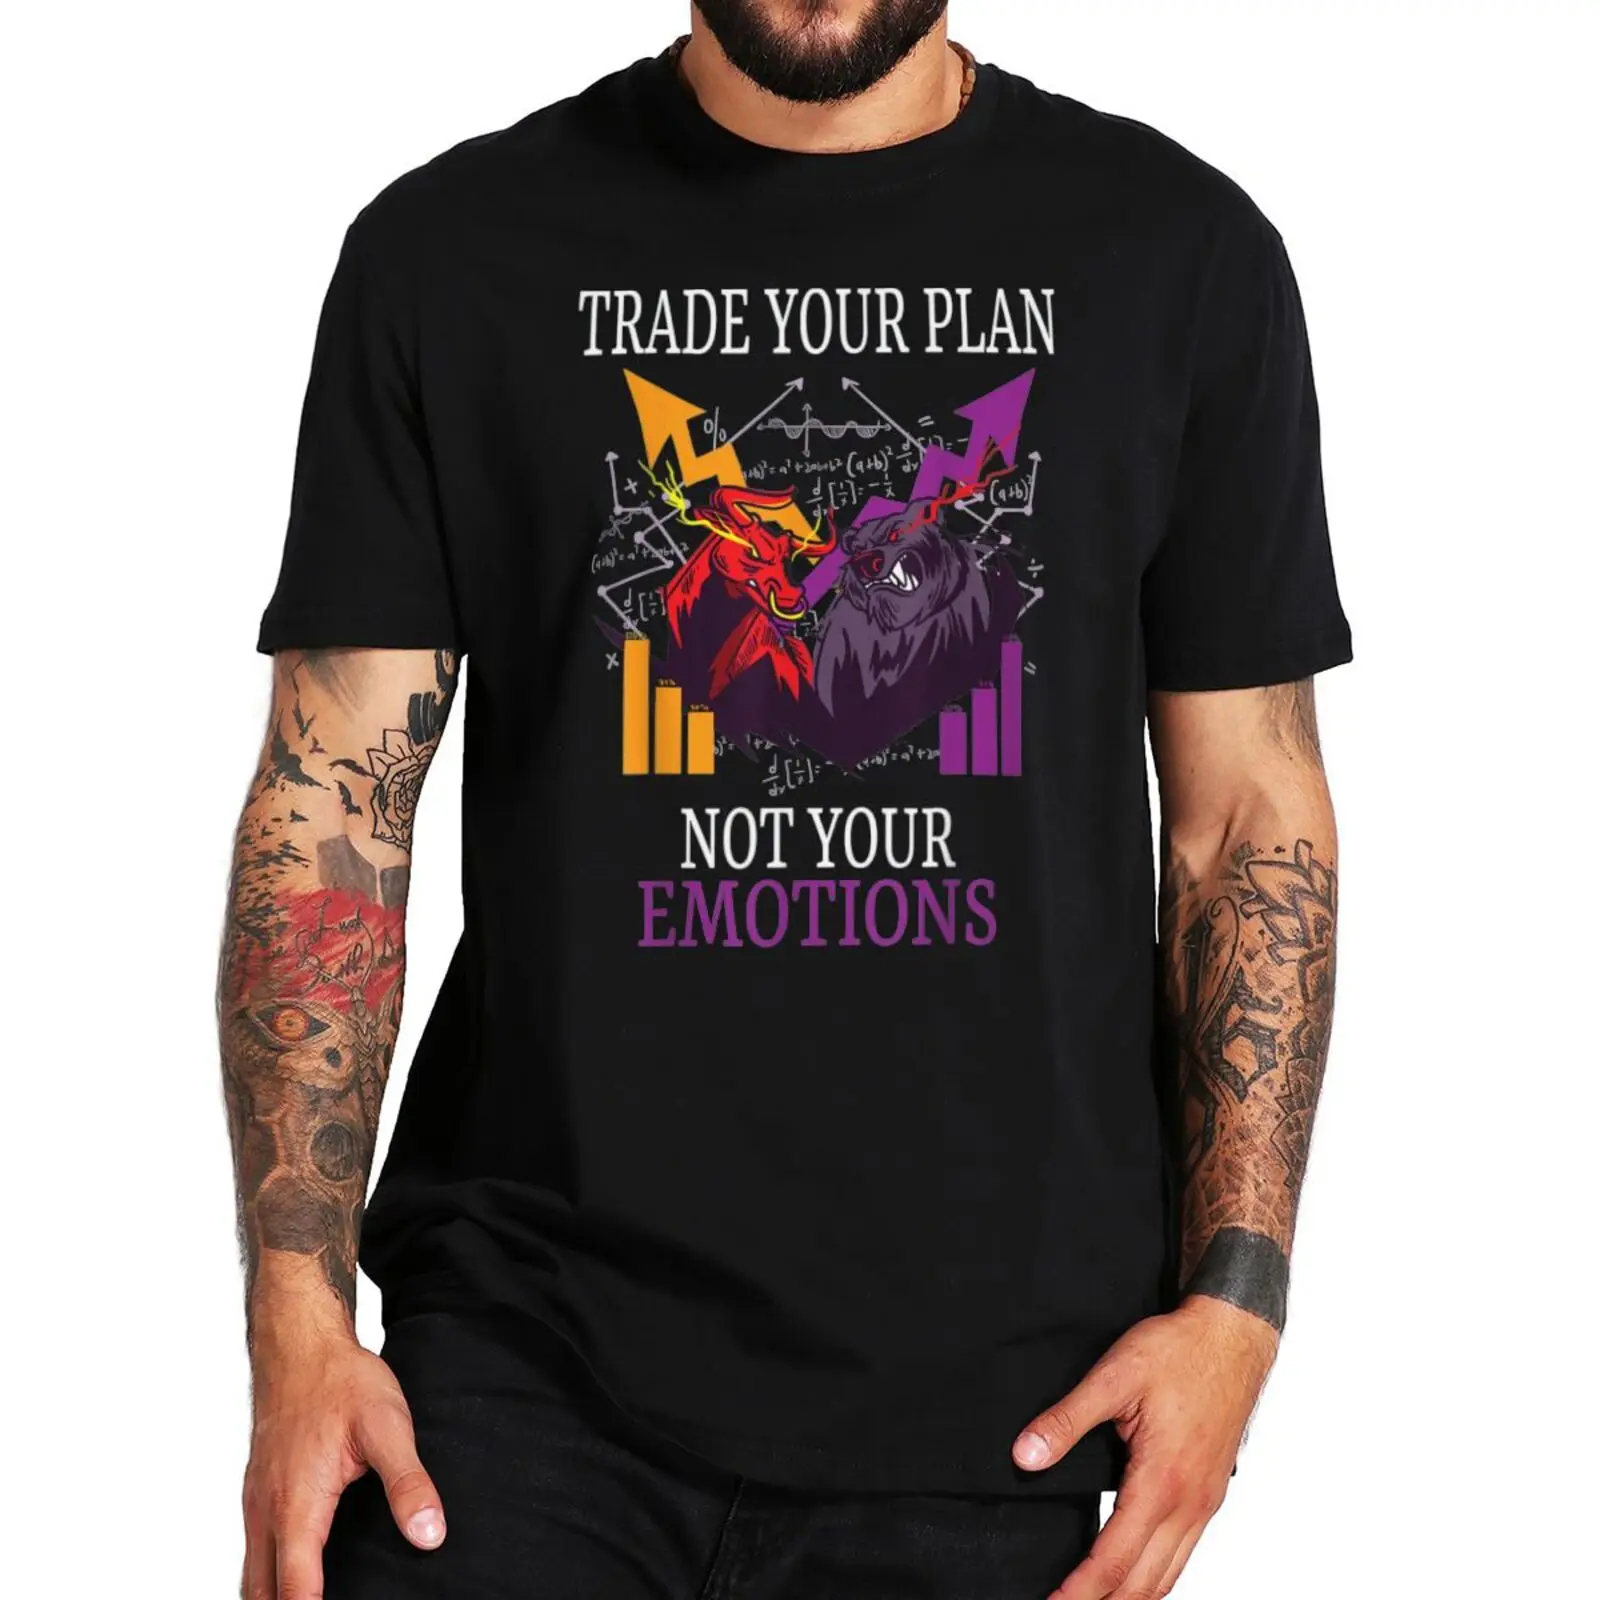 

Trade Your Plan Not Your Emotions T-Shirt Funny Day Trading Stocks Cryptocurrency Lovers Tee Tops Summer Cotton T Shirt